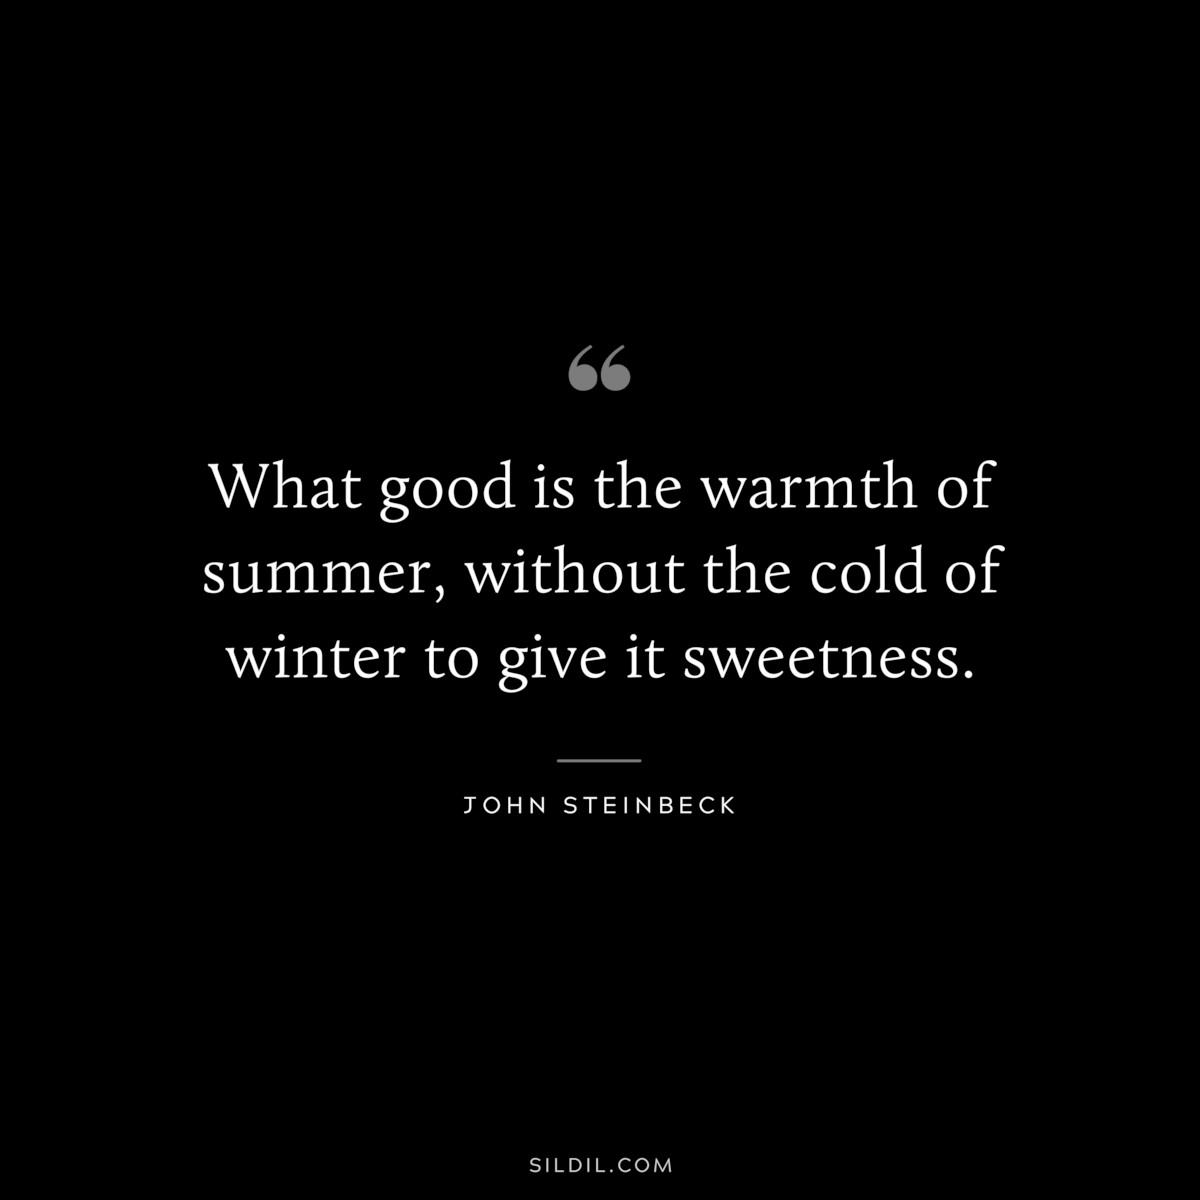 What good is the warmth of summer, without the cold of winter to give it sweetness.― John Steinbeck